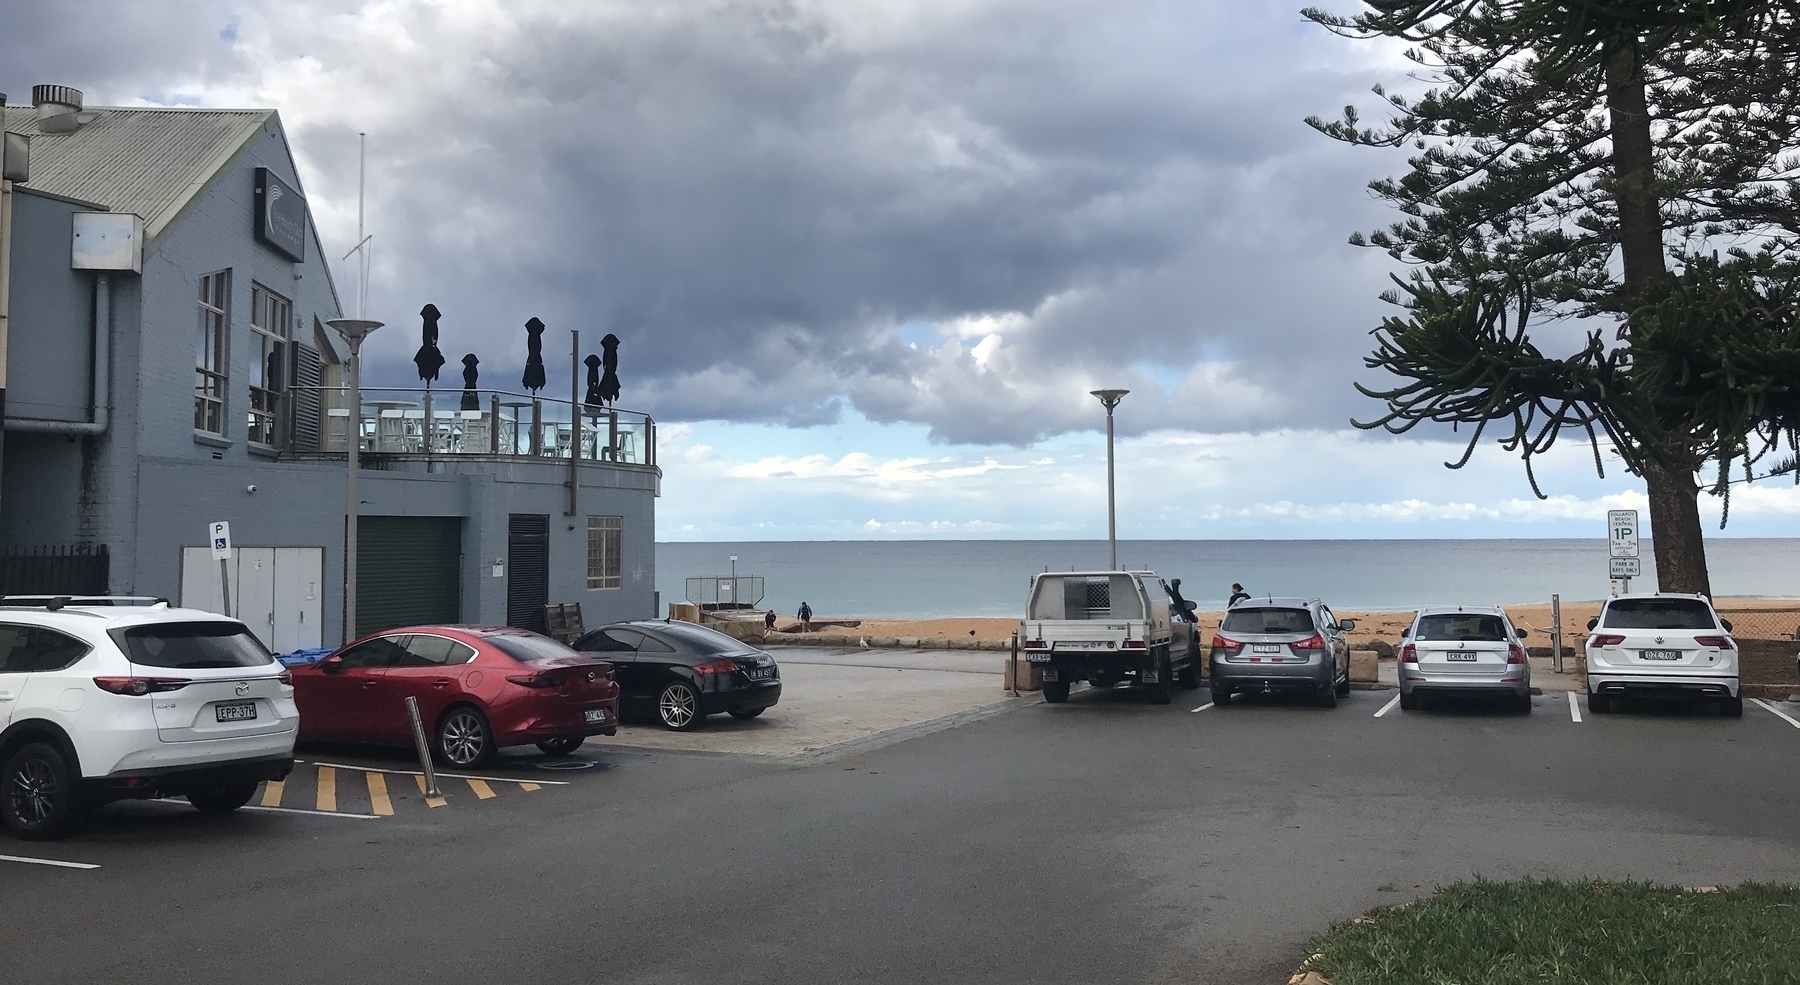 Looking across a carpark with a grey, gabled building on the left and a Norfolk Pine tree on the right, towards a beach, a dark grey sea with a flat horizon, and a sky with two contrasting aspects. For a short distance above the horizon the sky is pale blue with fluffy white clouds. Above this hang dark stormclouds, reaching all the way to the top of the photo. The grey building on the left has a balcony with five black umbrellas standing folded against the dark grey clouds. Two boys in black are hurrying up the beach towards the carpark.